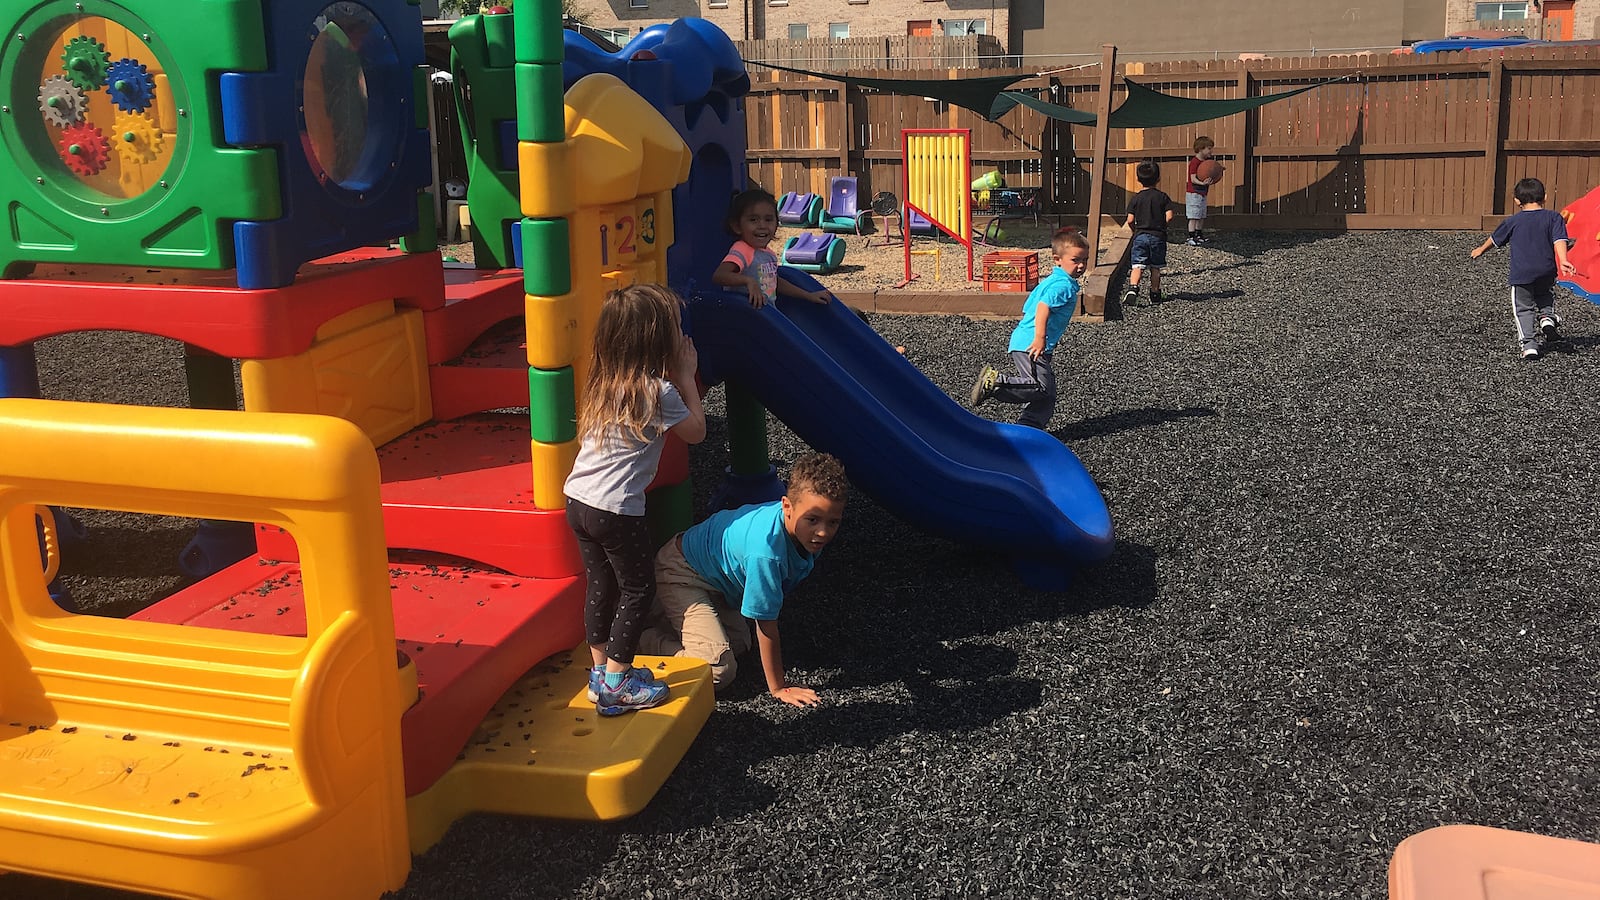 This play structure at Step By Step Child Development Center in Northglenn will go away under a plan to create a more natural and engaging outdoor play space.